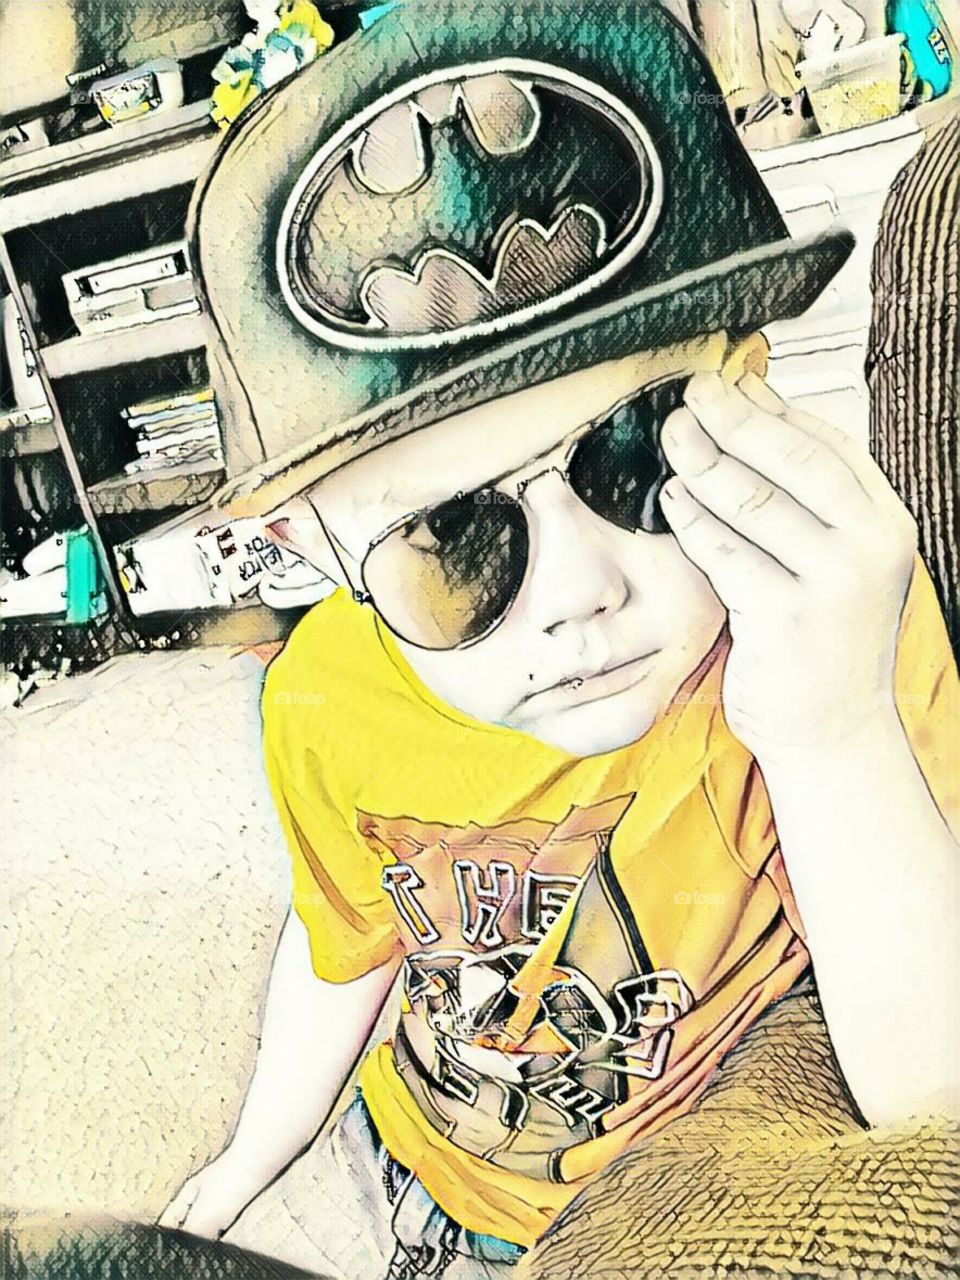 Sketched style abstract of boy in Batman hat, holding shades on his face.